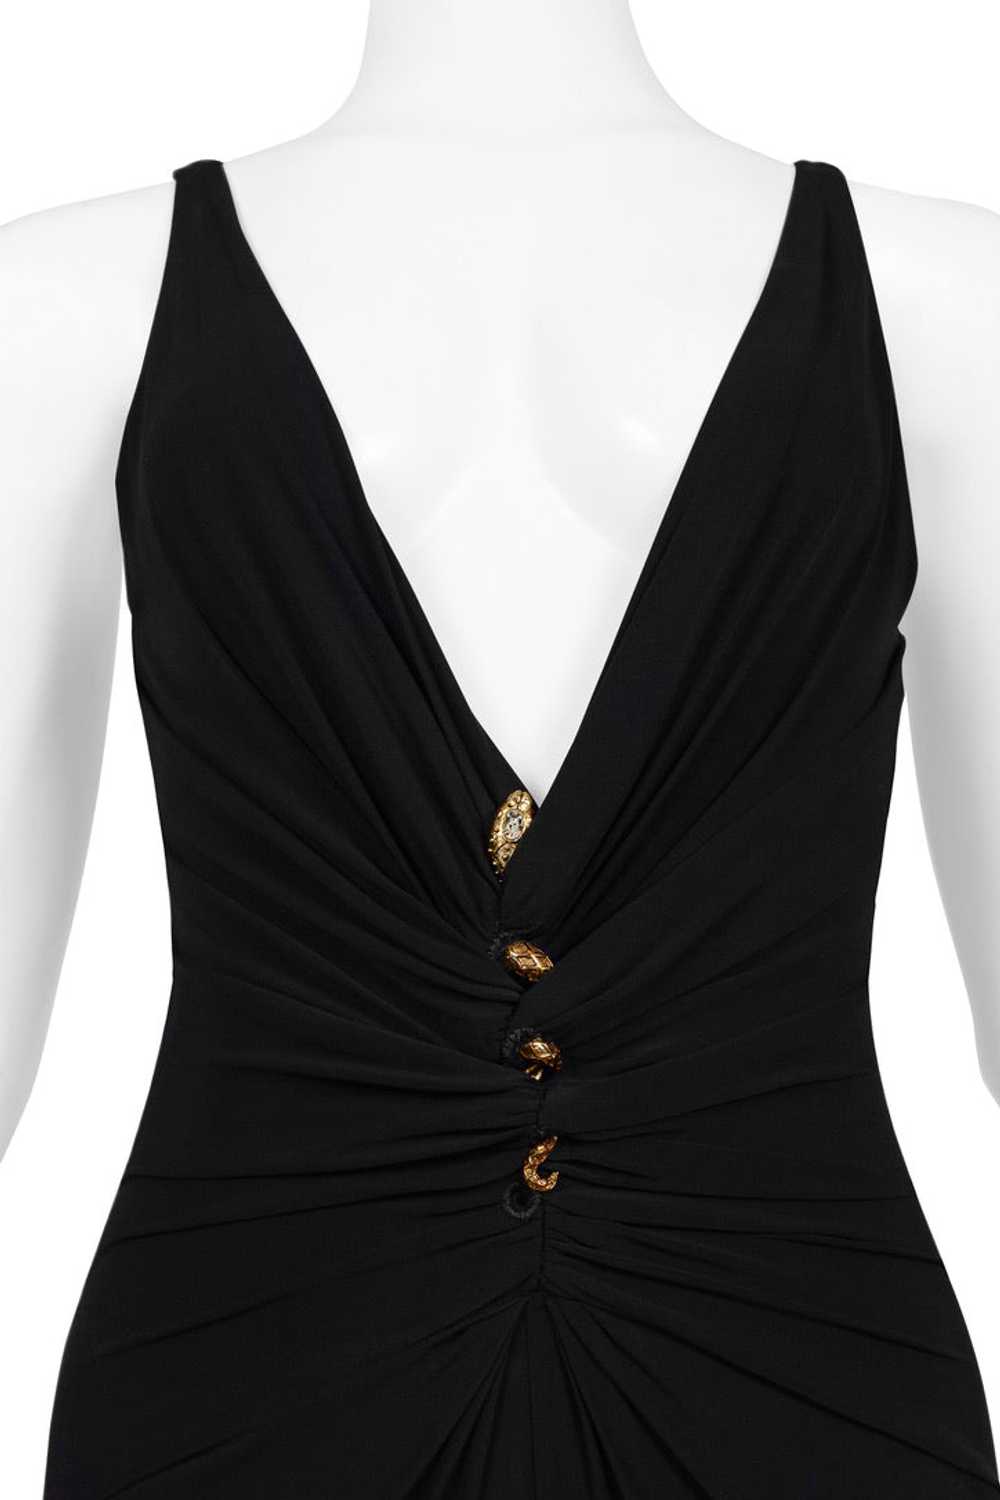 ROBERTO CAVALLI BLACK JERSEY EVENING GOWN WITH GO… - image 2